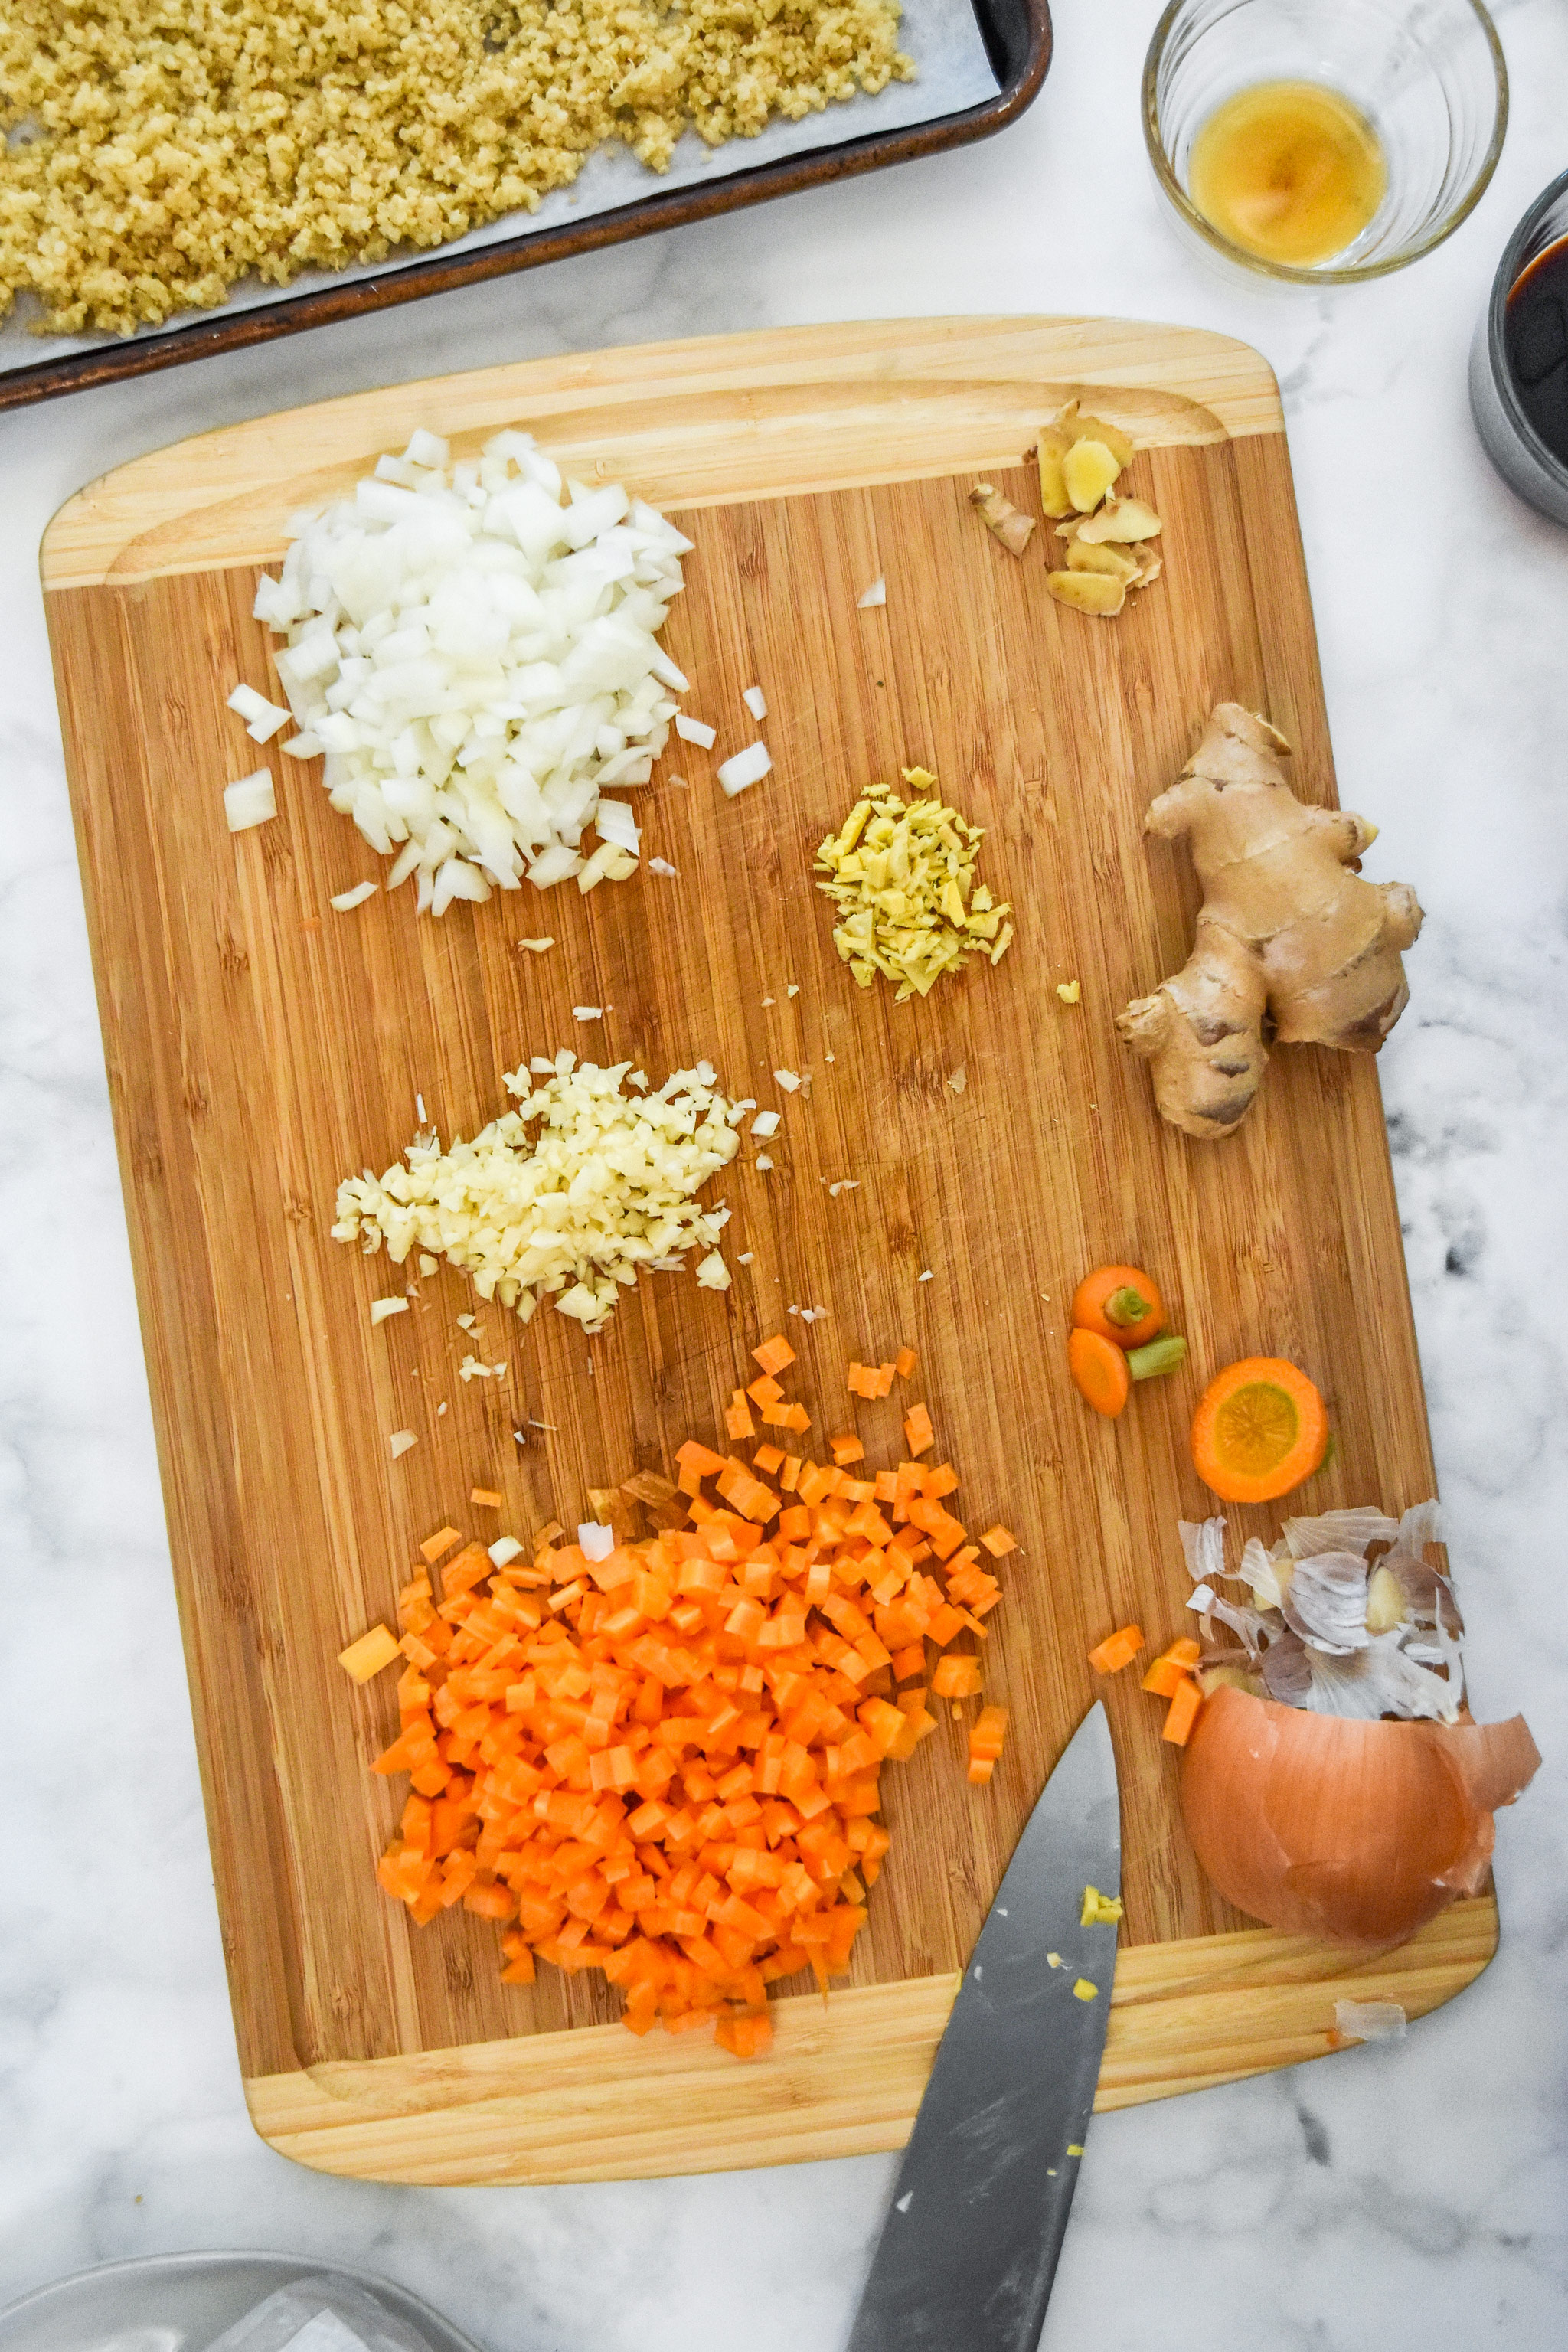 chopped and diced veggie ingredients on a cutting board.